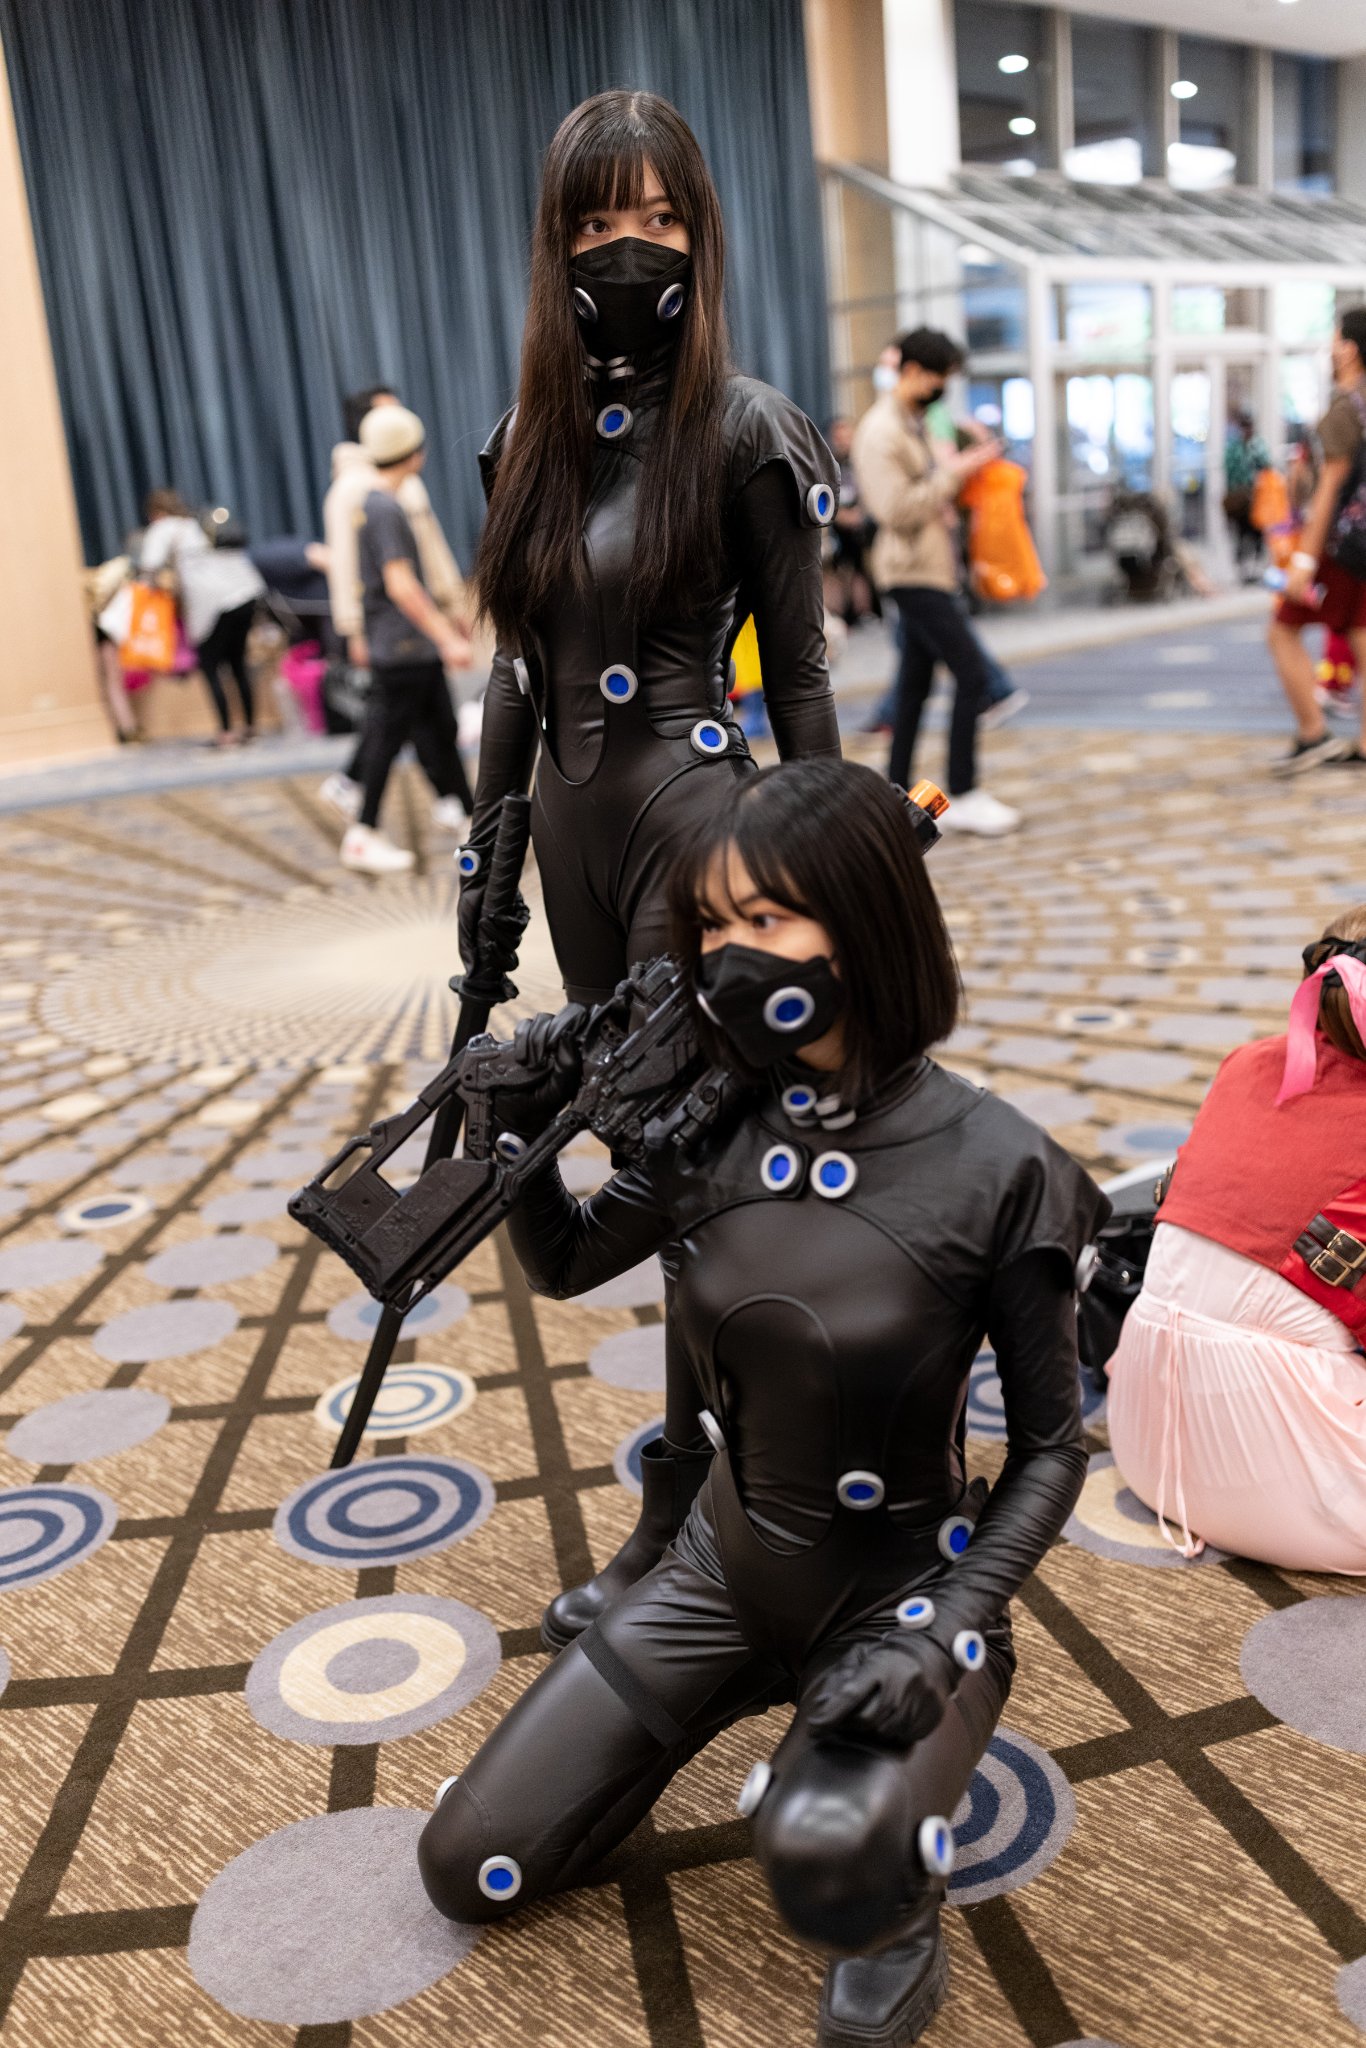 Anime Expo 2022: Model rigs and frilly dresses – Annenberg Media